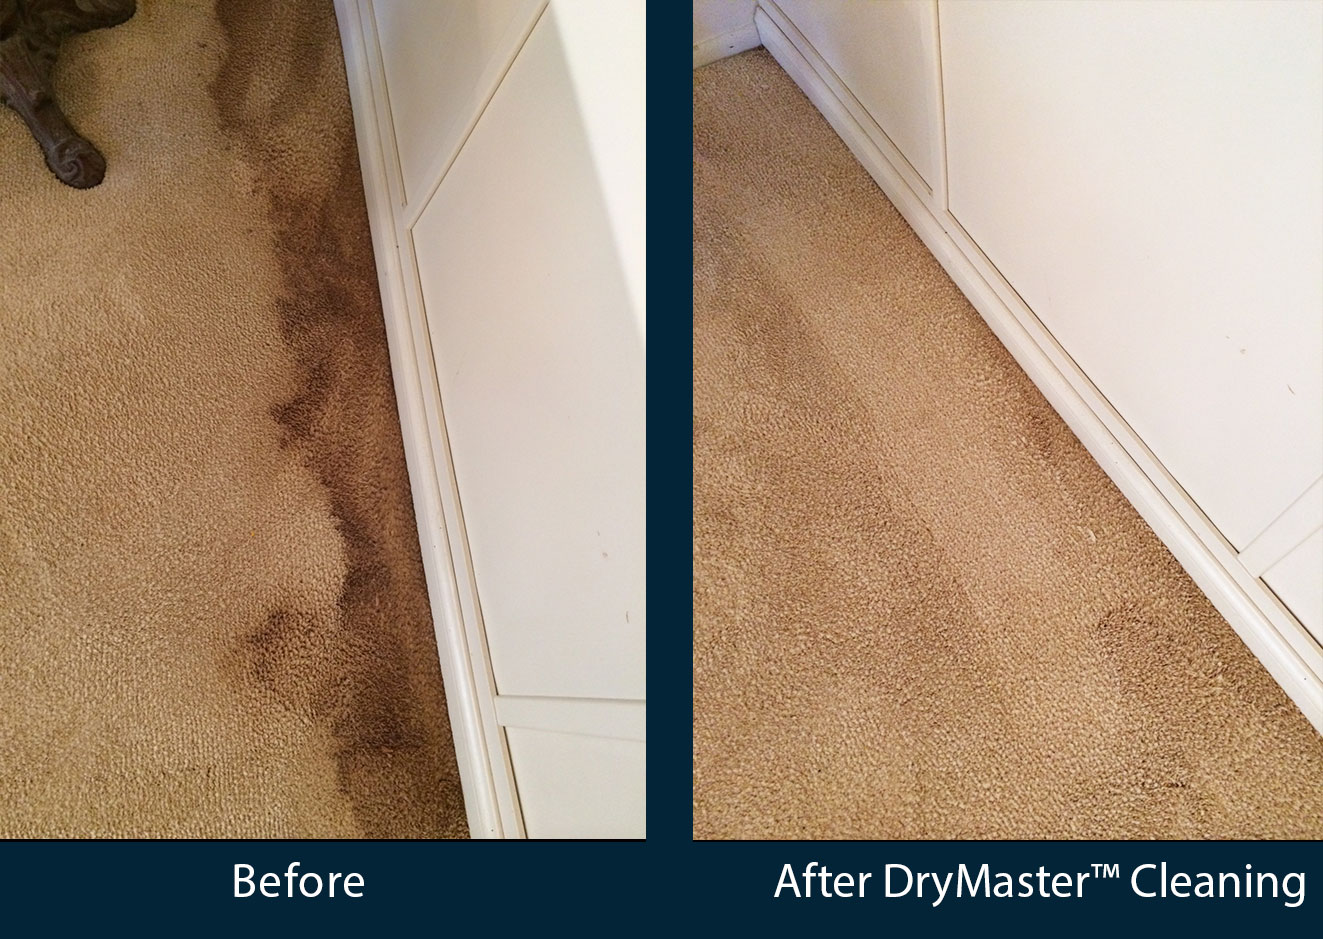 professional carpet cleaning before and after photos